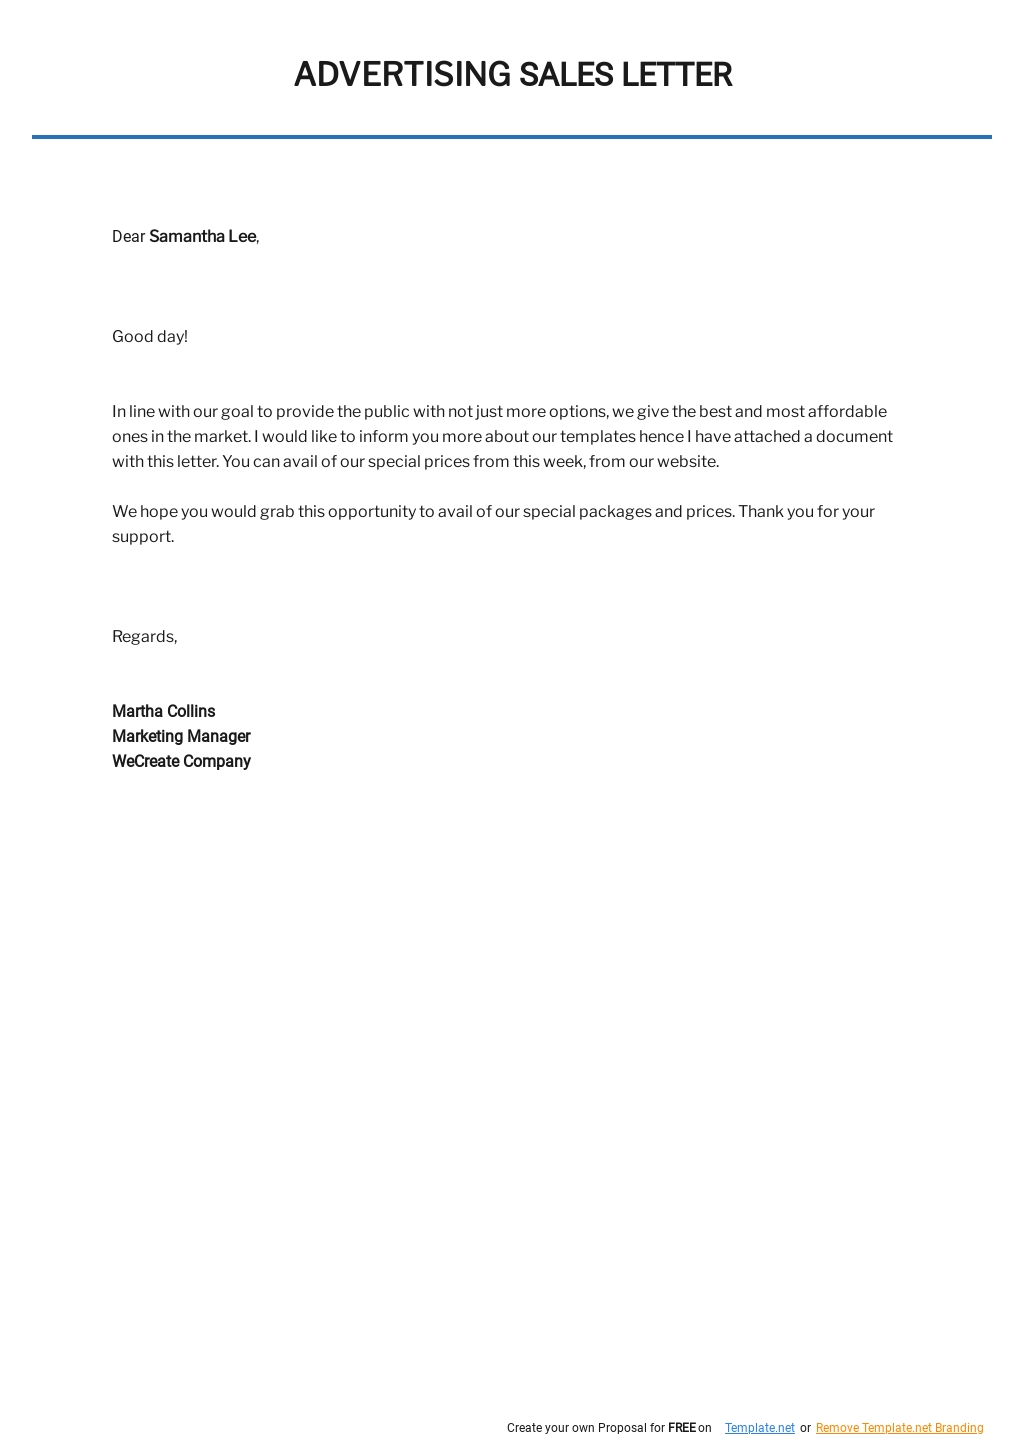 Advertising Sales Letter Template - Google Docs, Word